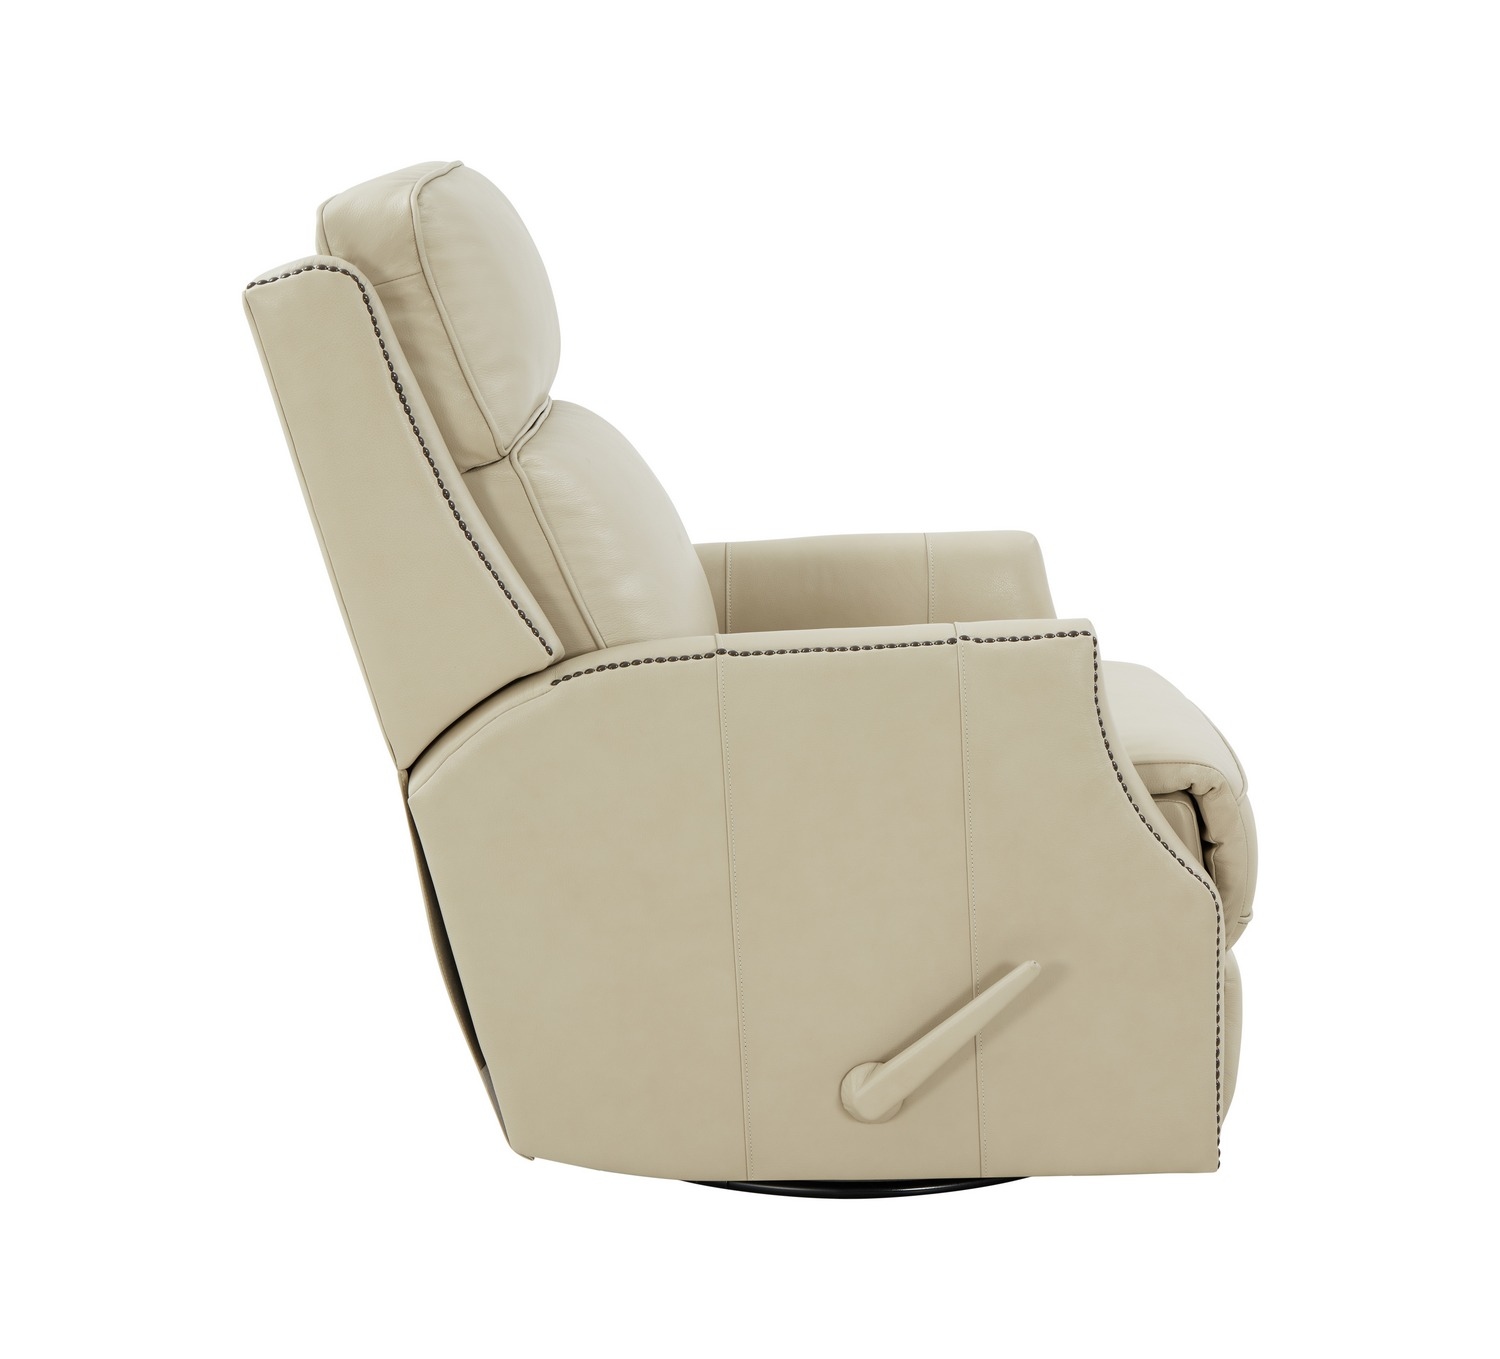 Barcalounger Aniston Swivel Glider Recliner Chair - Barone Parchment/All Leather